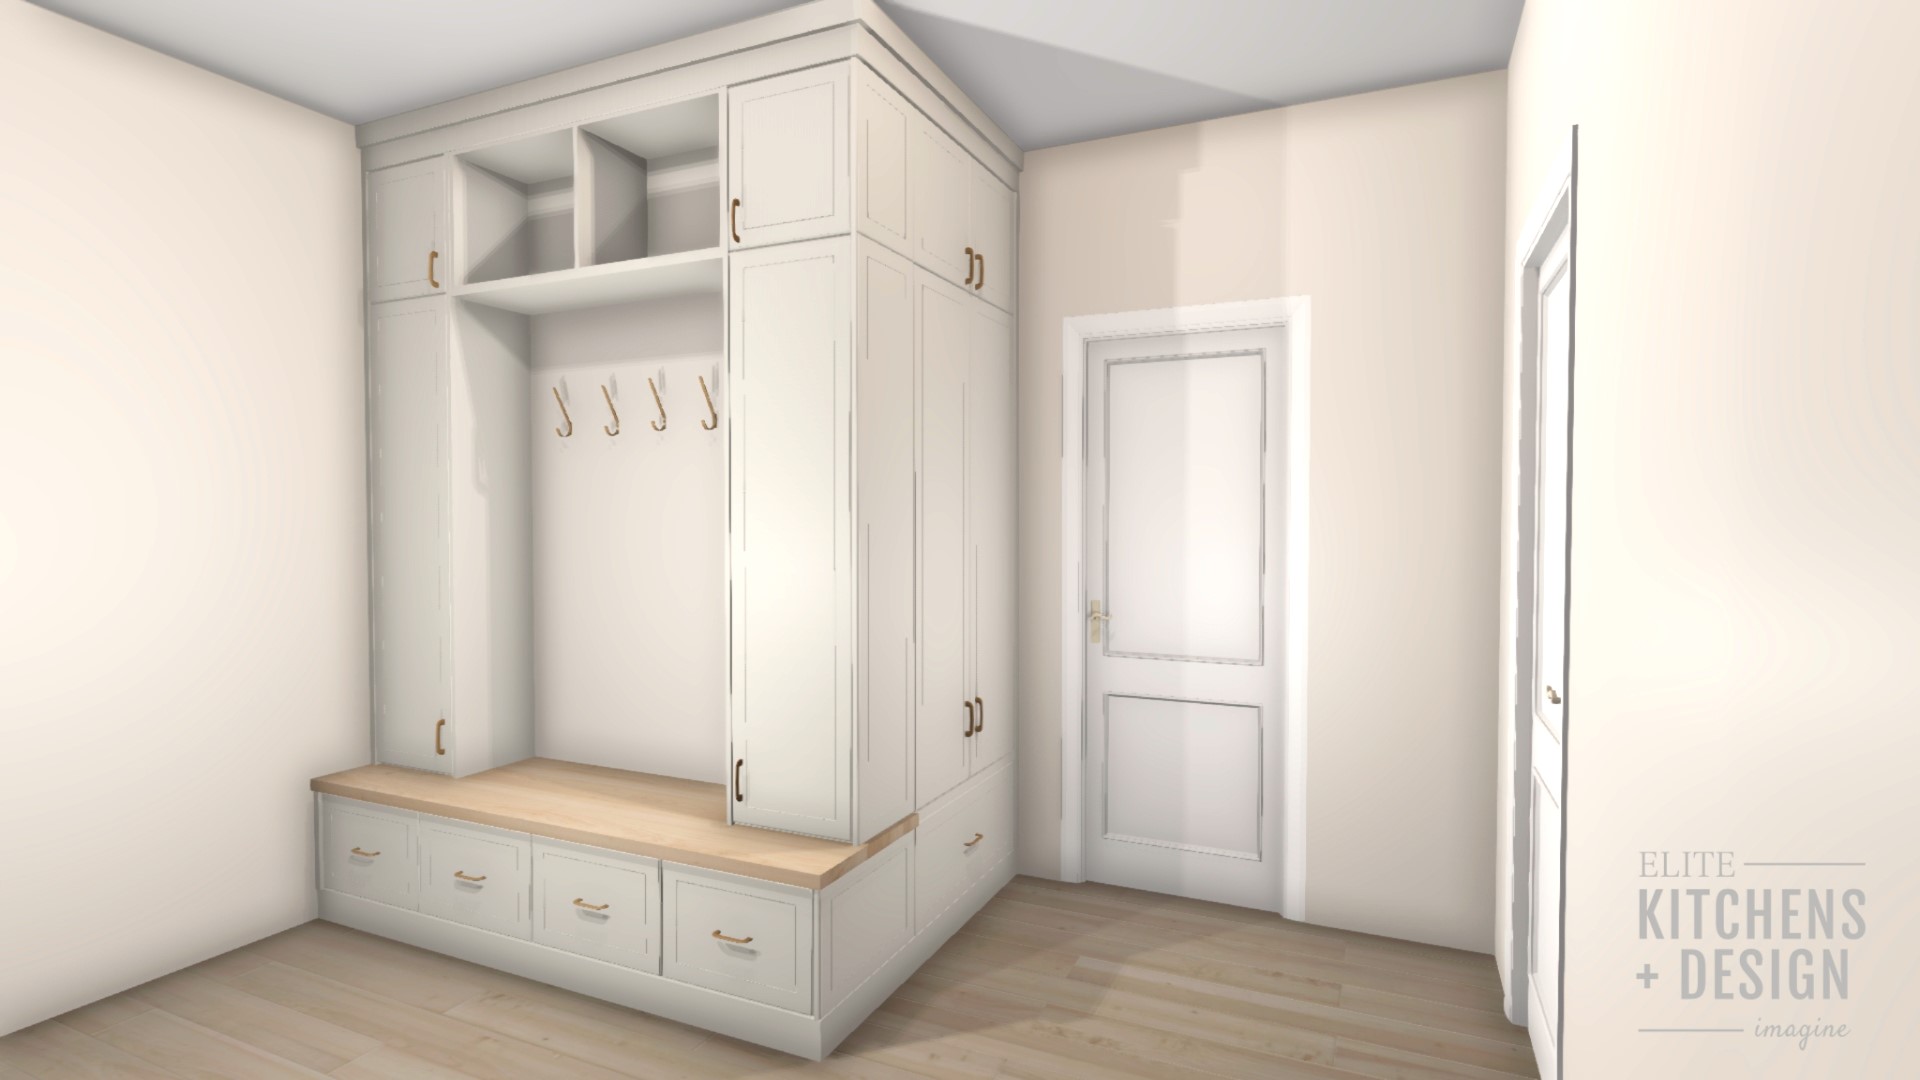 This image shows a clean, modern mudroom interior with built-in white cabinetry, a wooden bench, drawers, coat hooks, and two closed white doors.